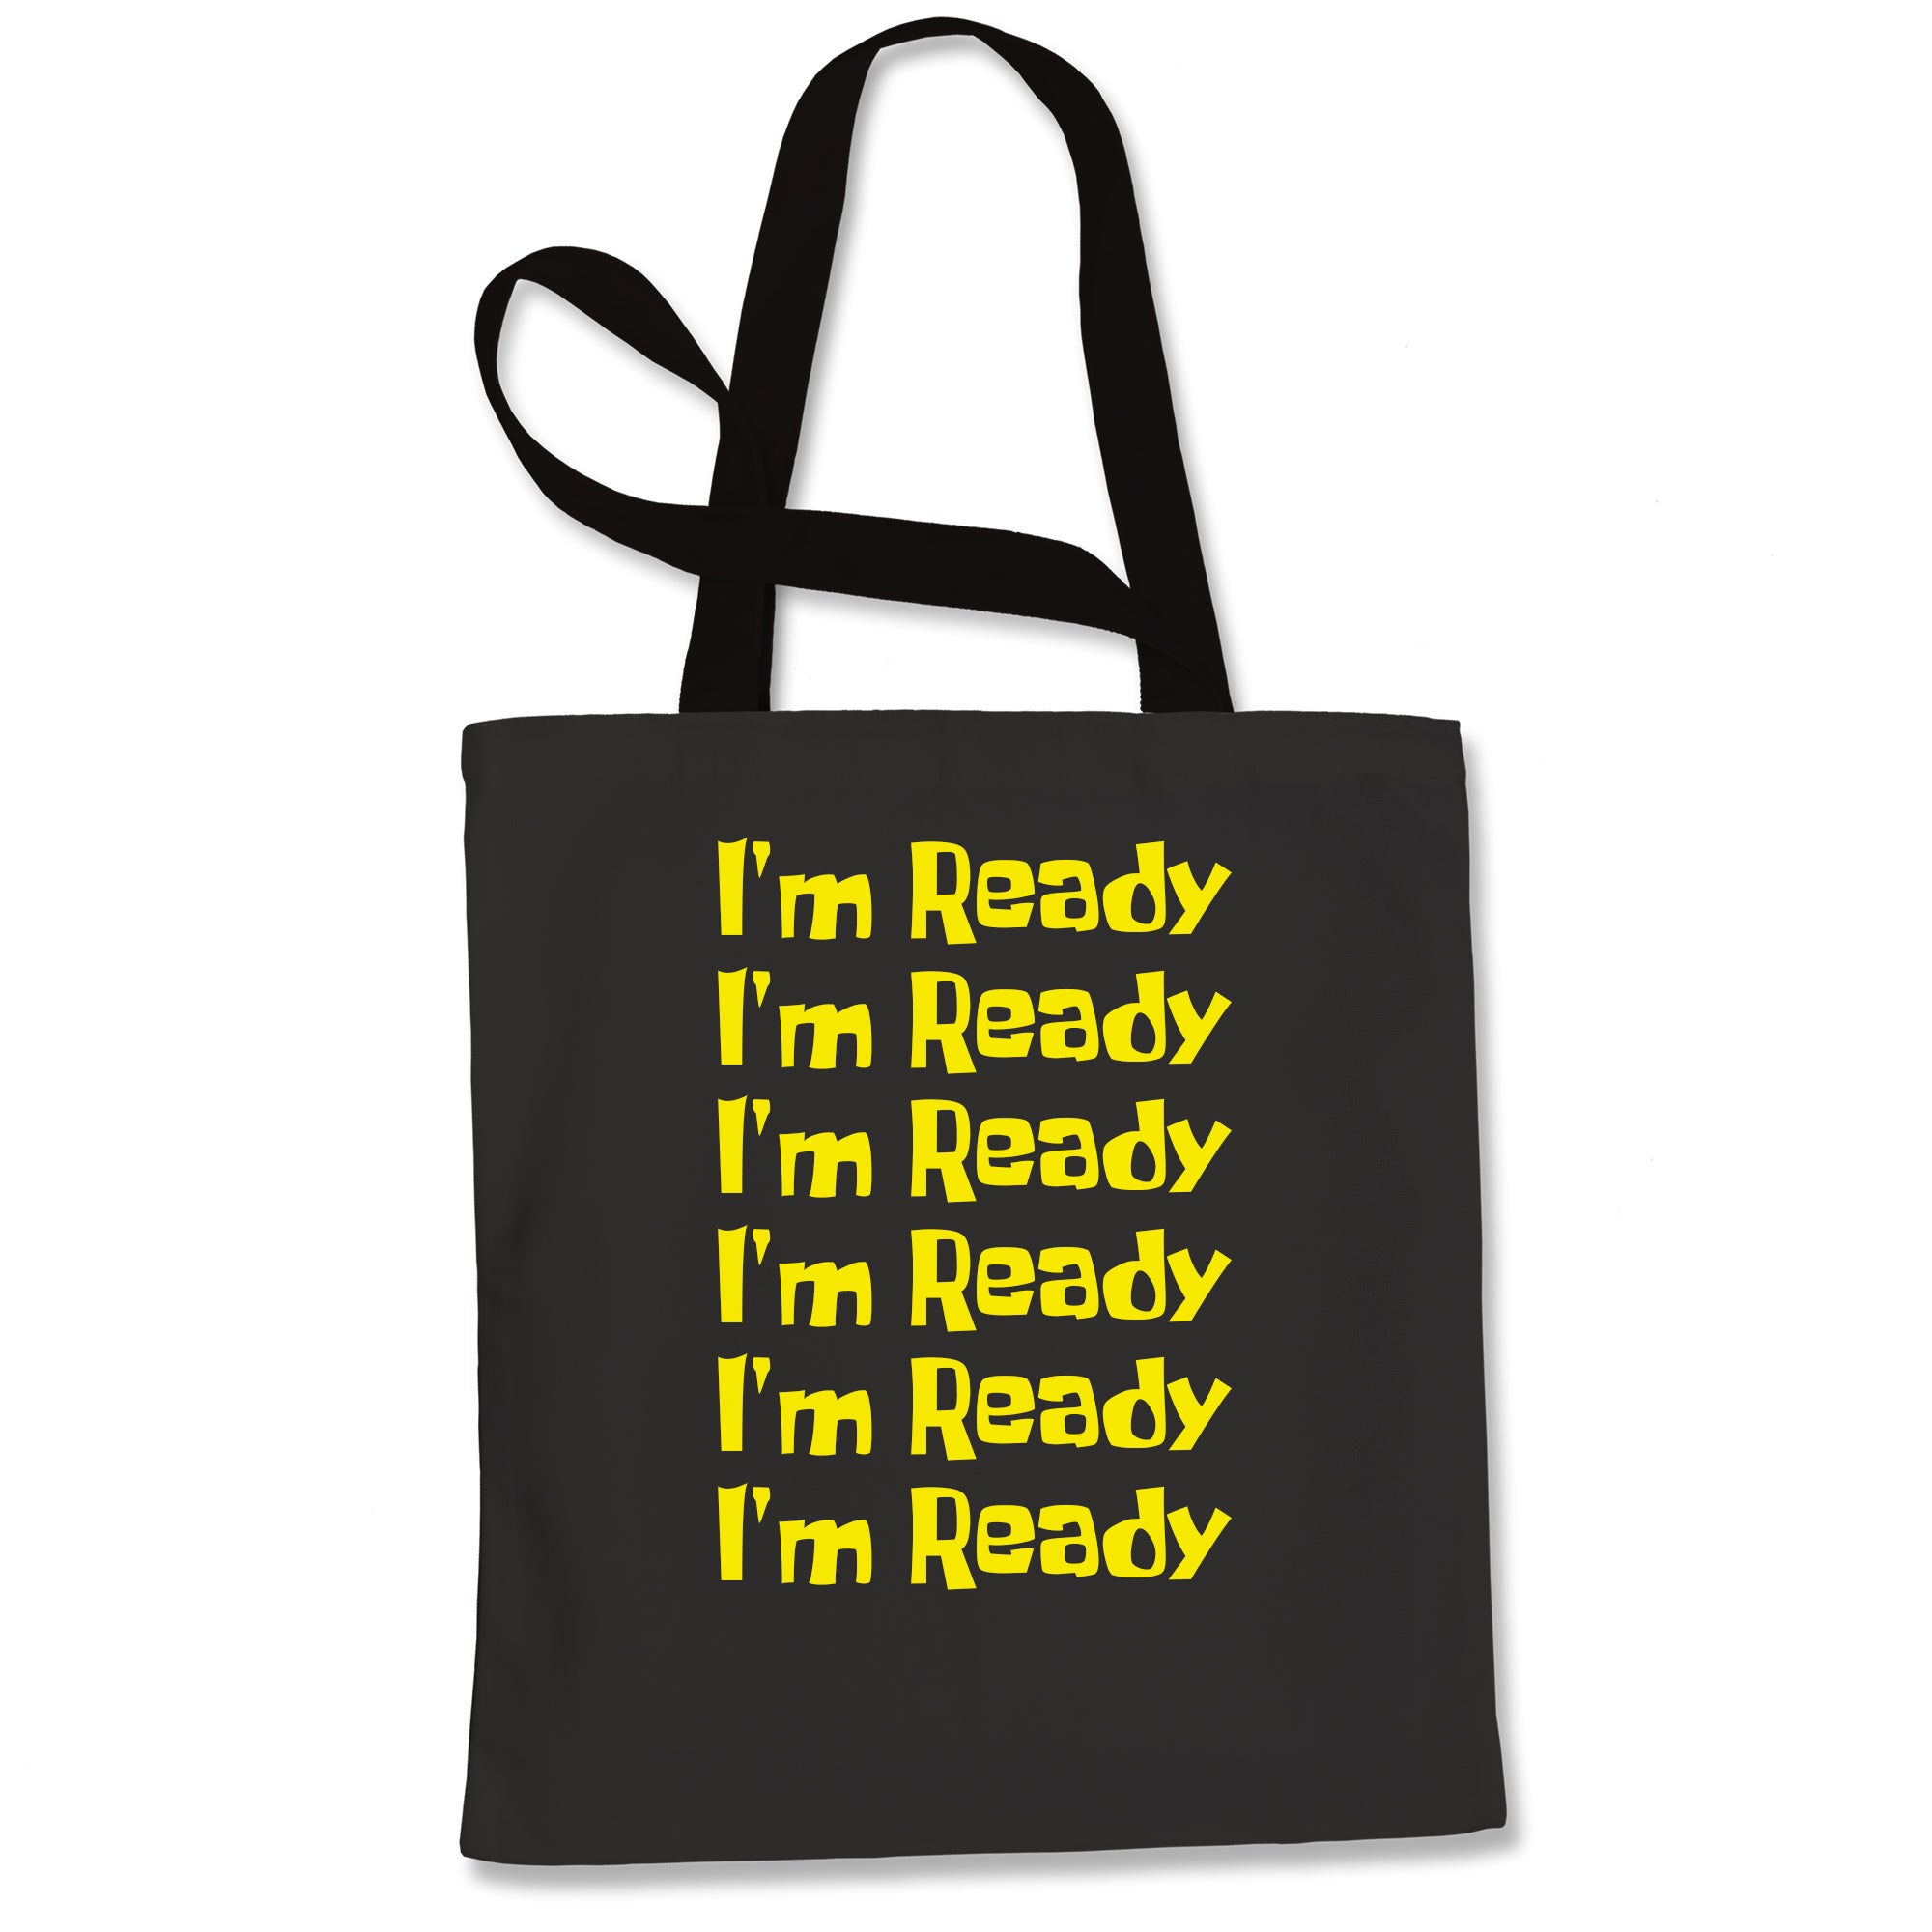 I'm Ready Funny Quote Catchphrase Spongebobble Tote Bag